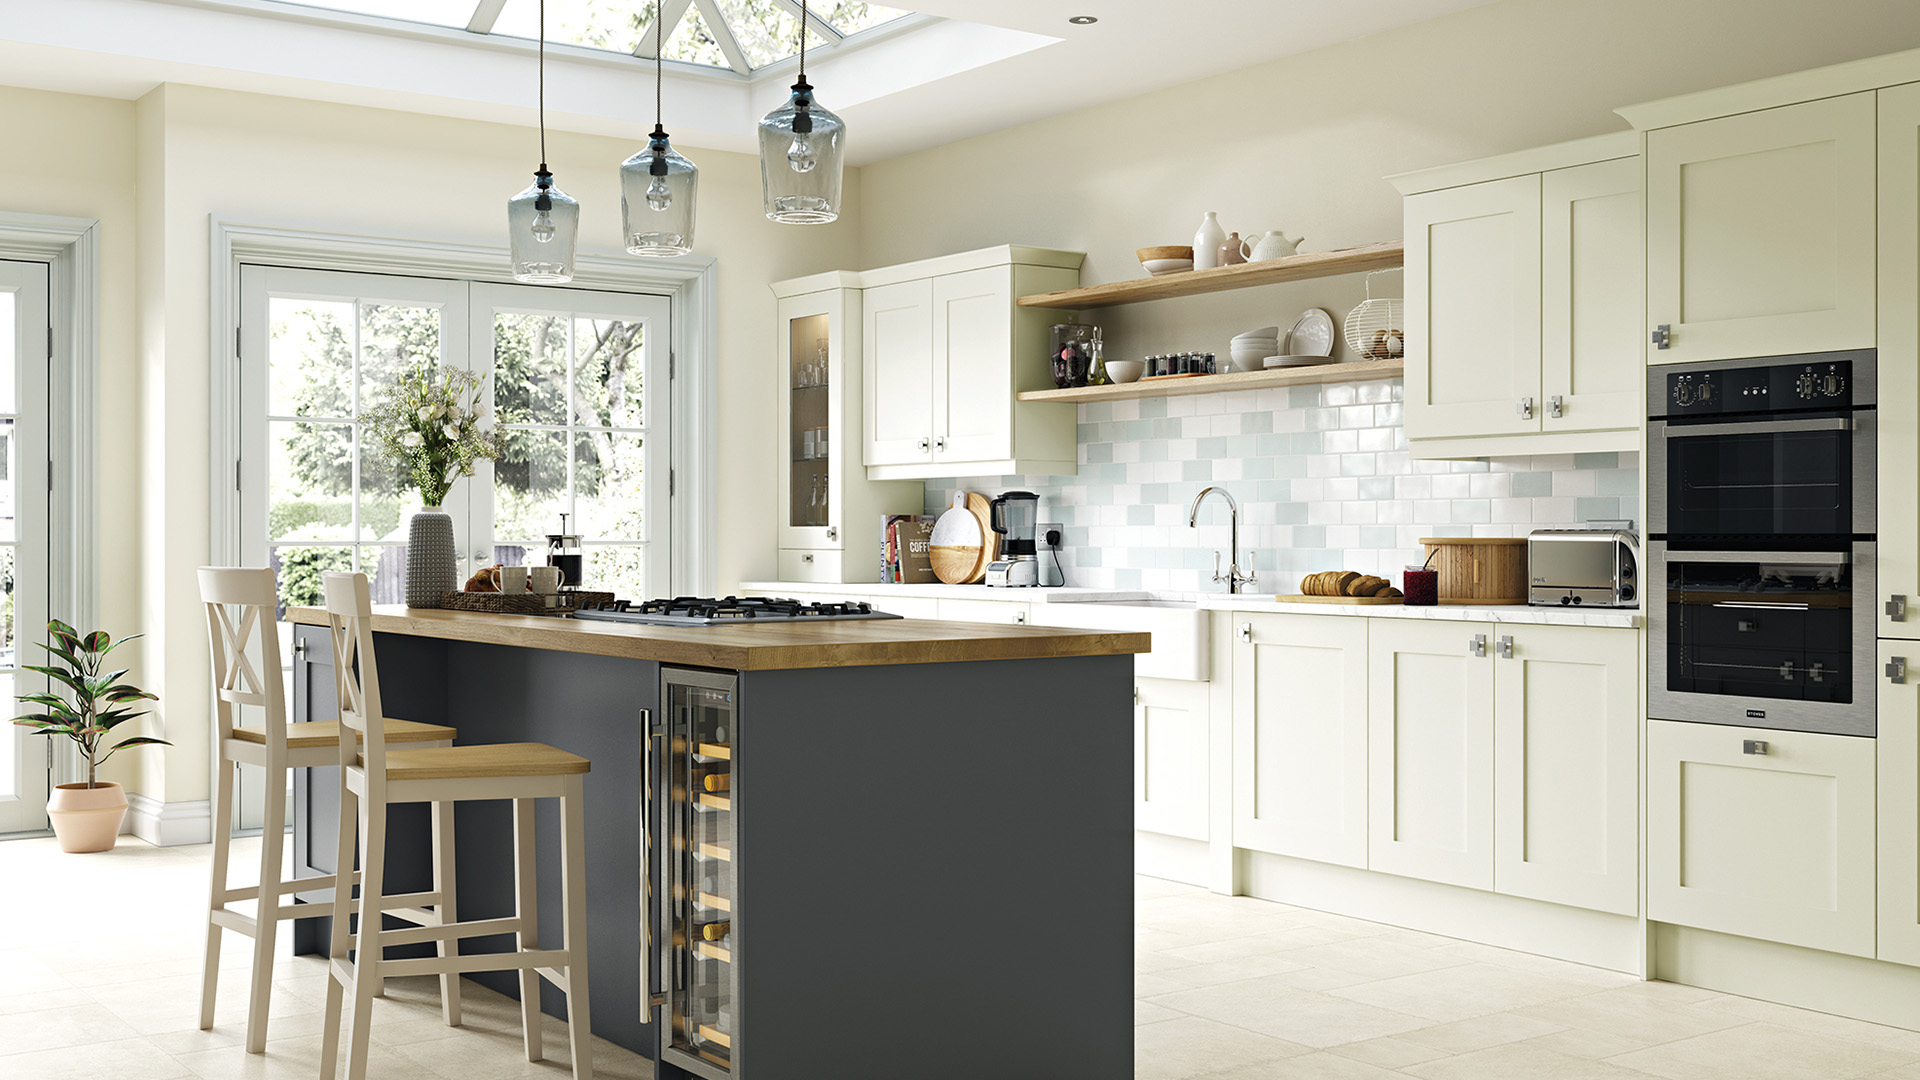 Georgia porcelain smooth shaker kitchens offering a harmonious mix of traditional design and modern materials